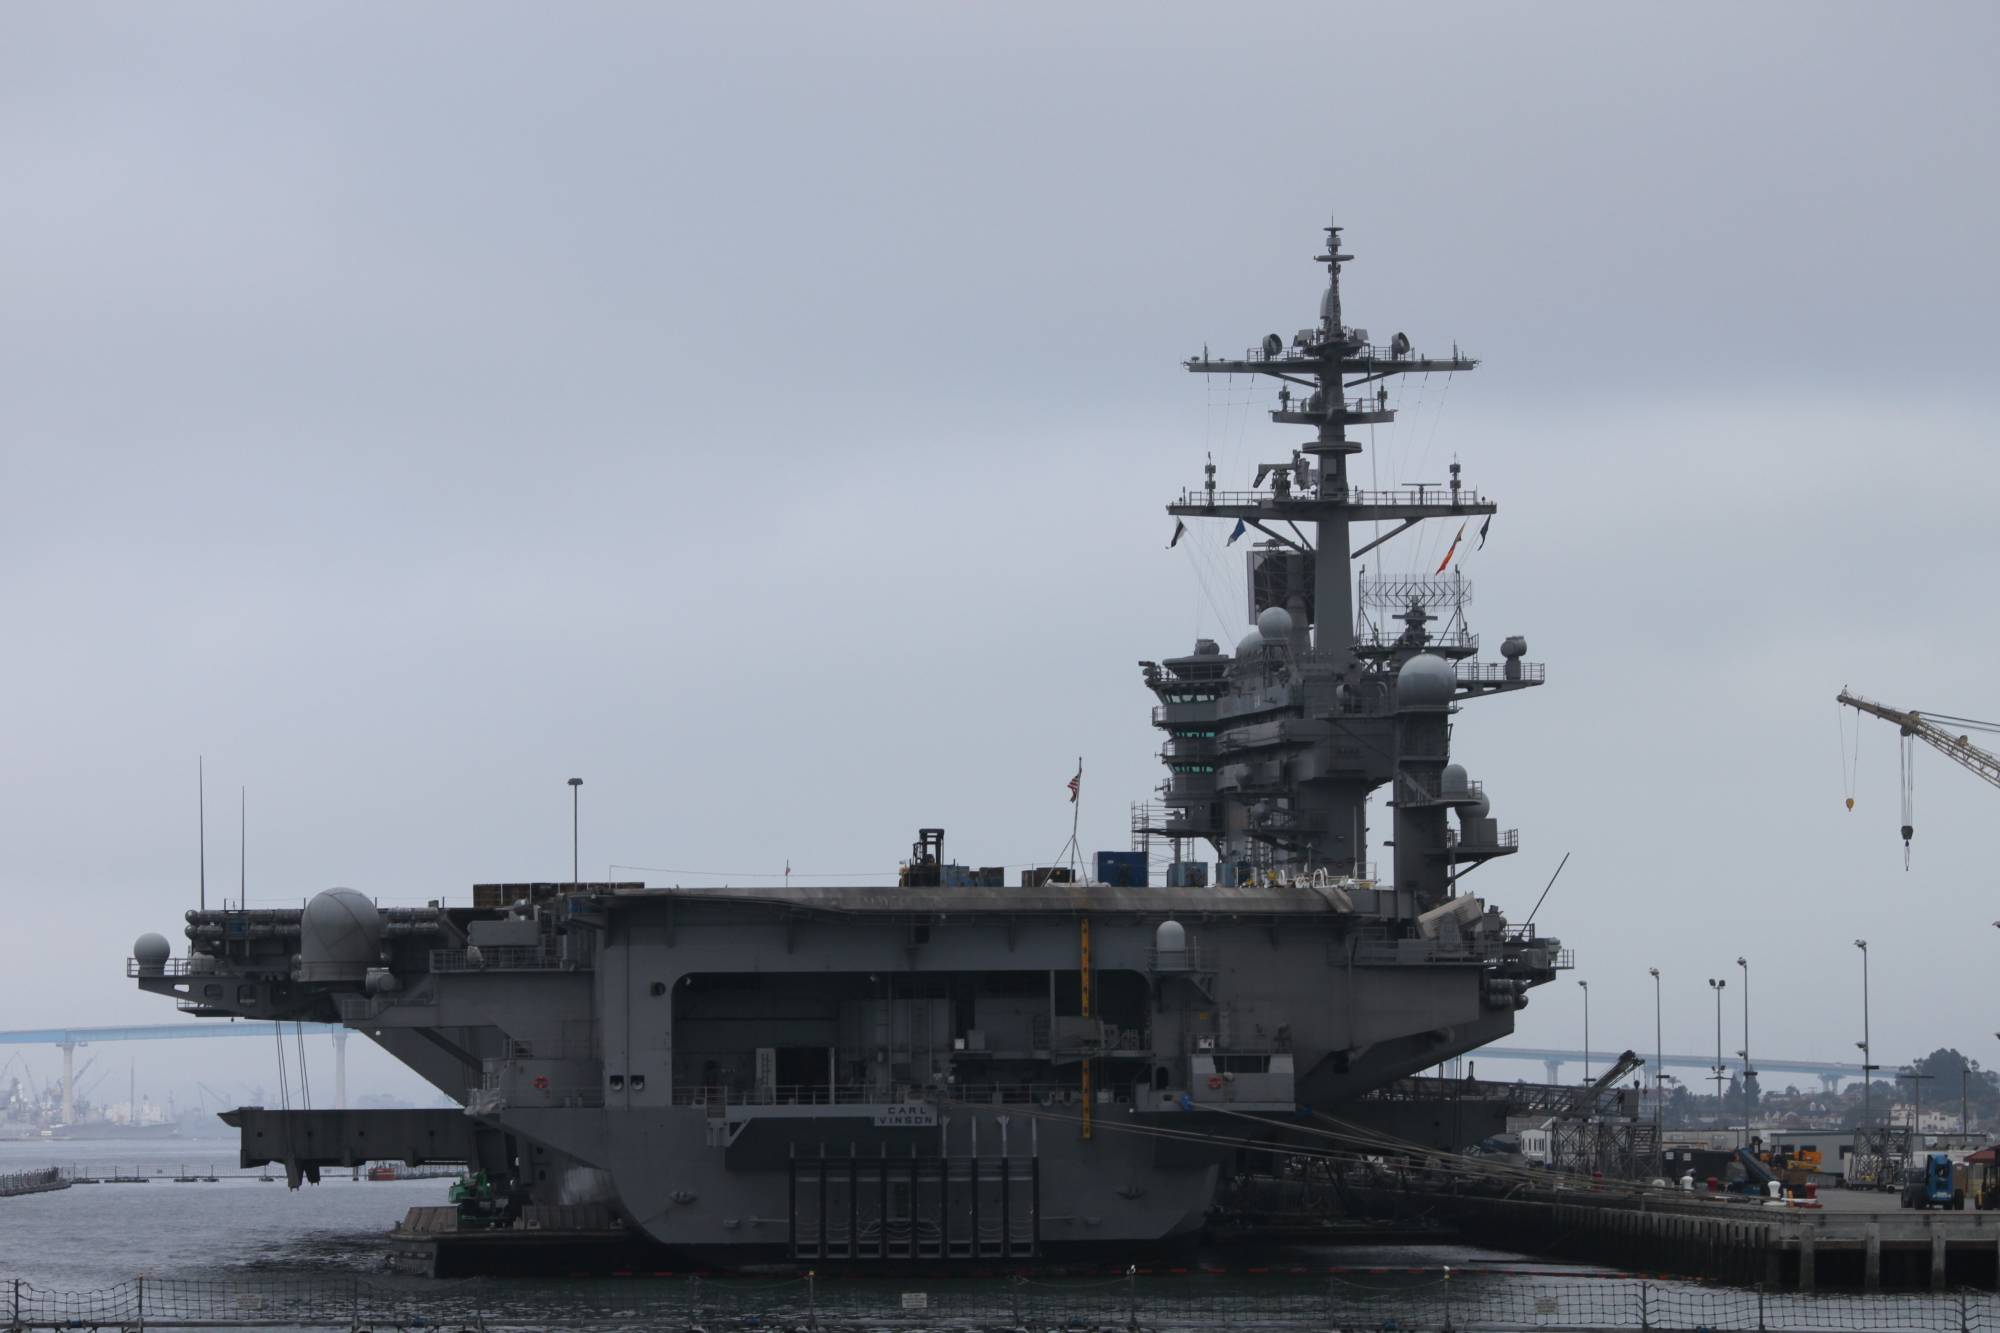 Aft end of the USS Carl Vinson in port in San Diego